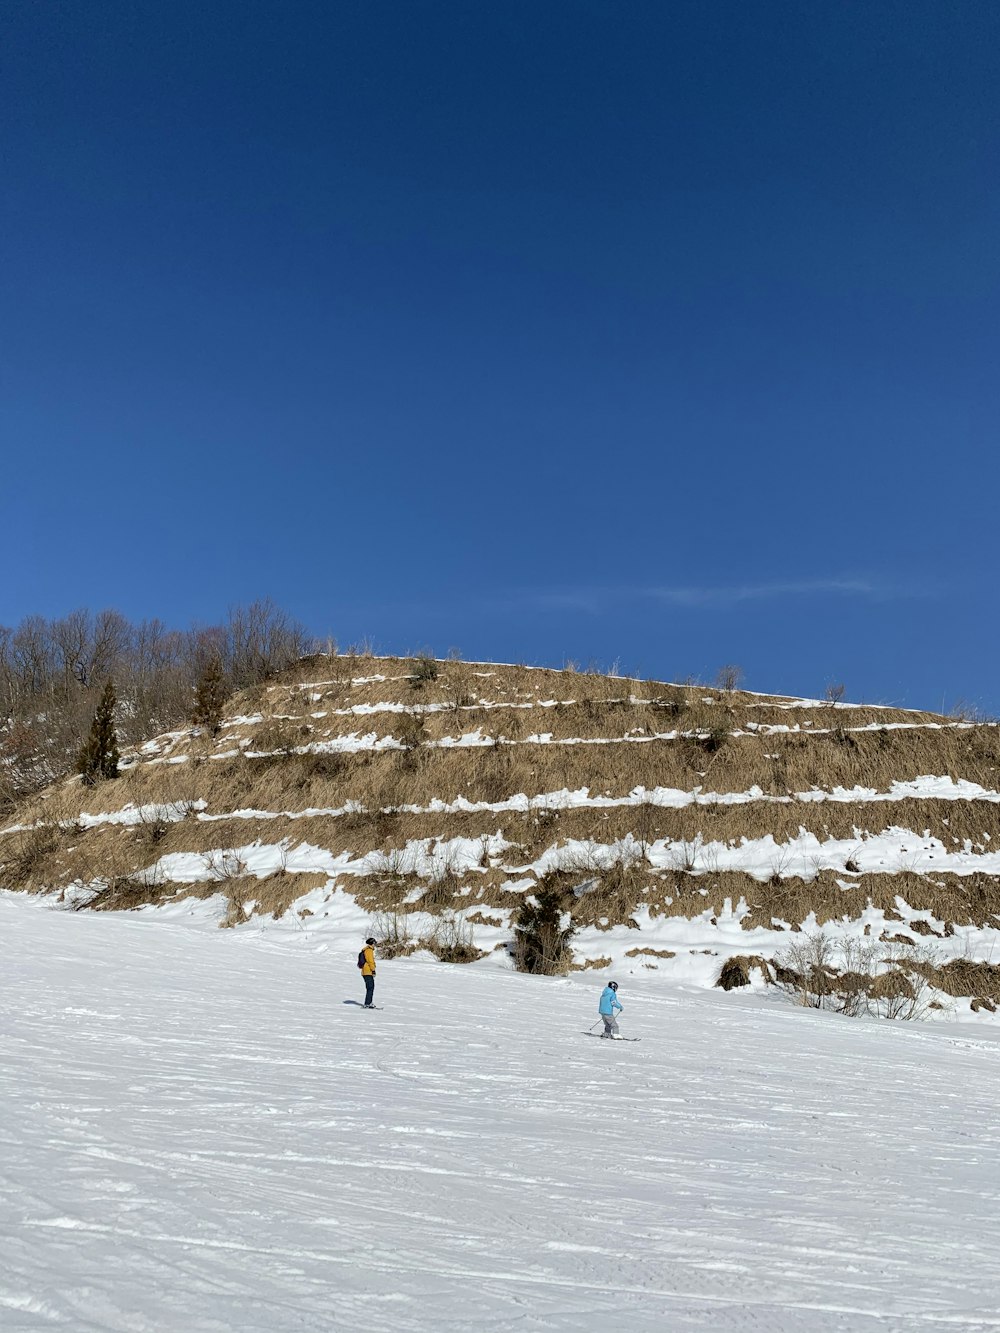 people playing snow ski on snow covered field during daytime